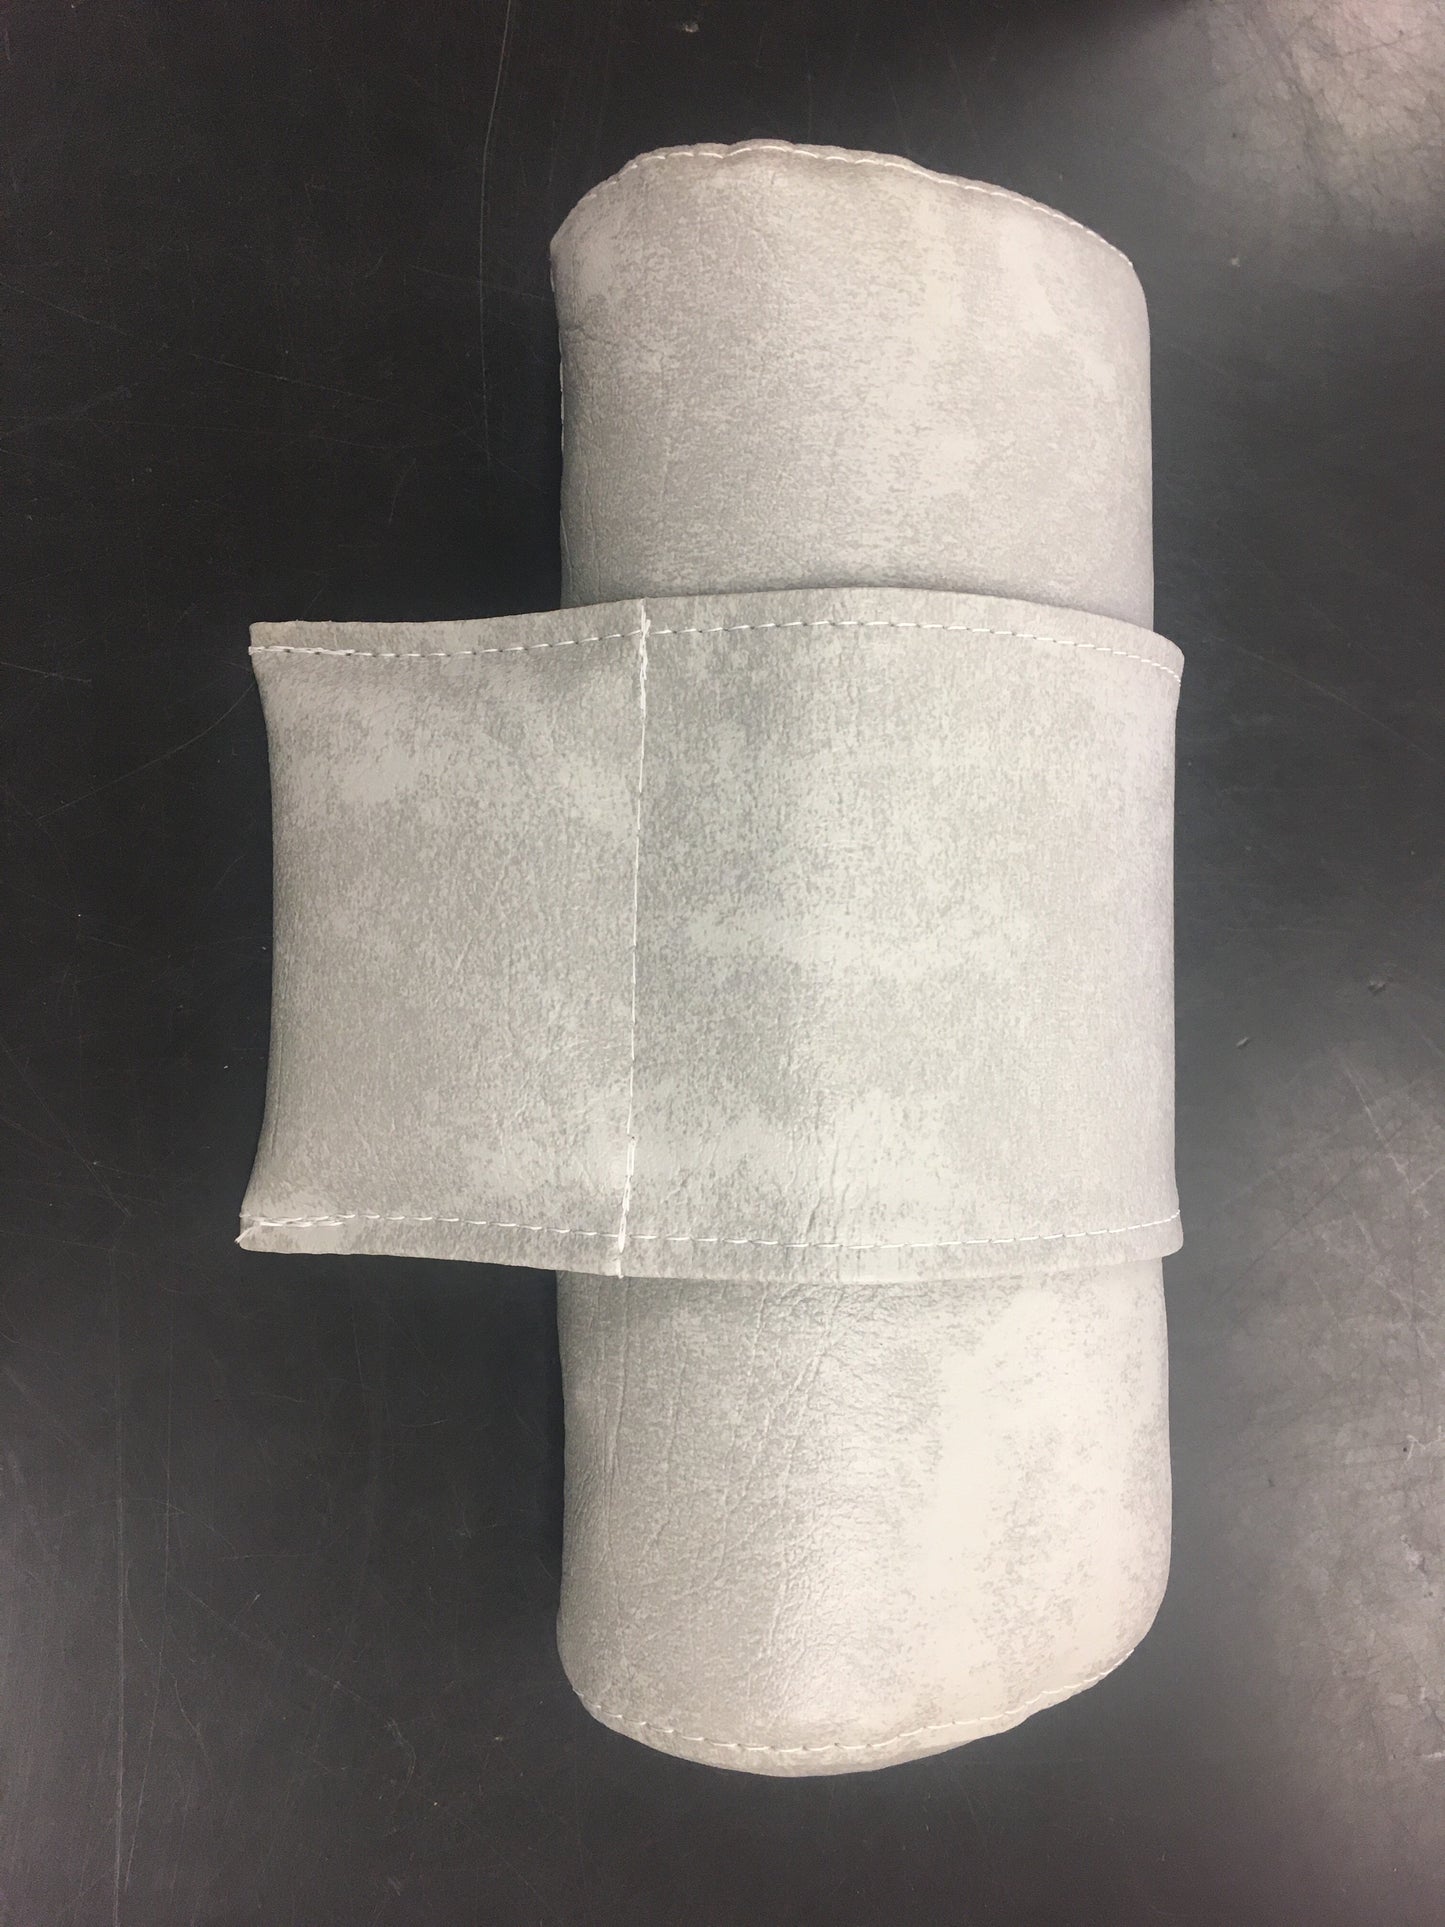 Spa Pillow - With Weighted Counter-balance